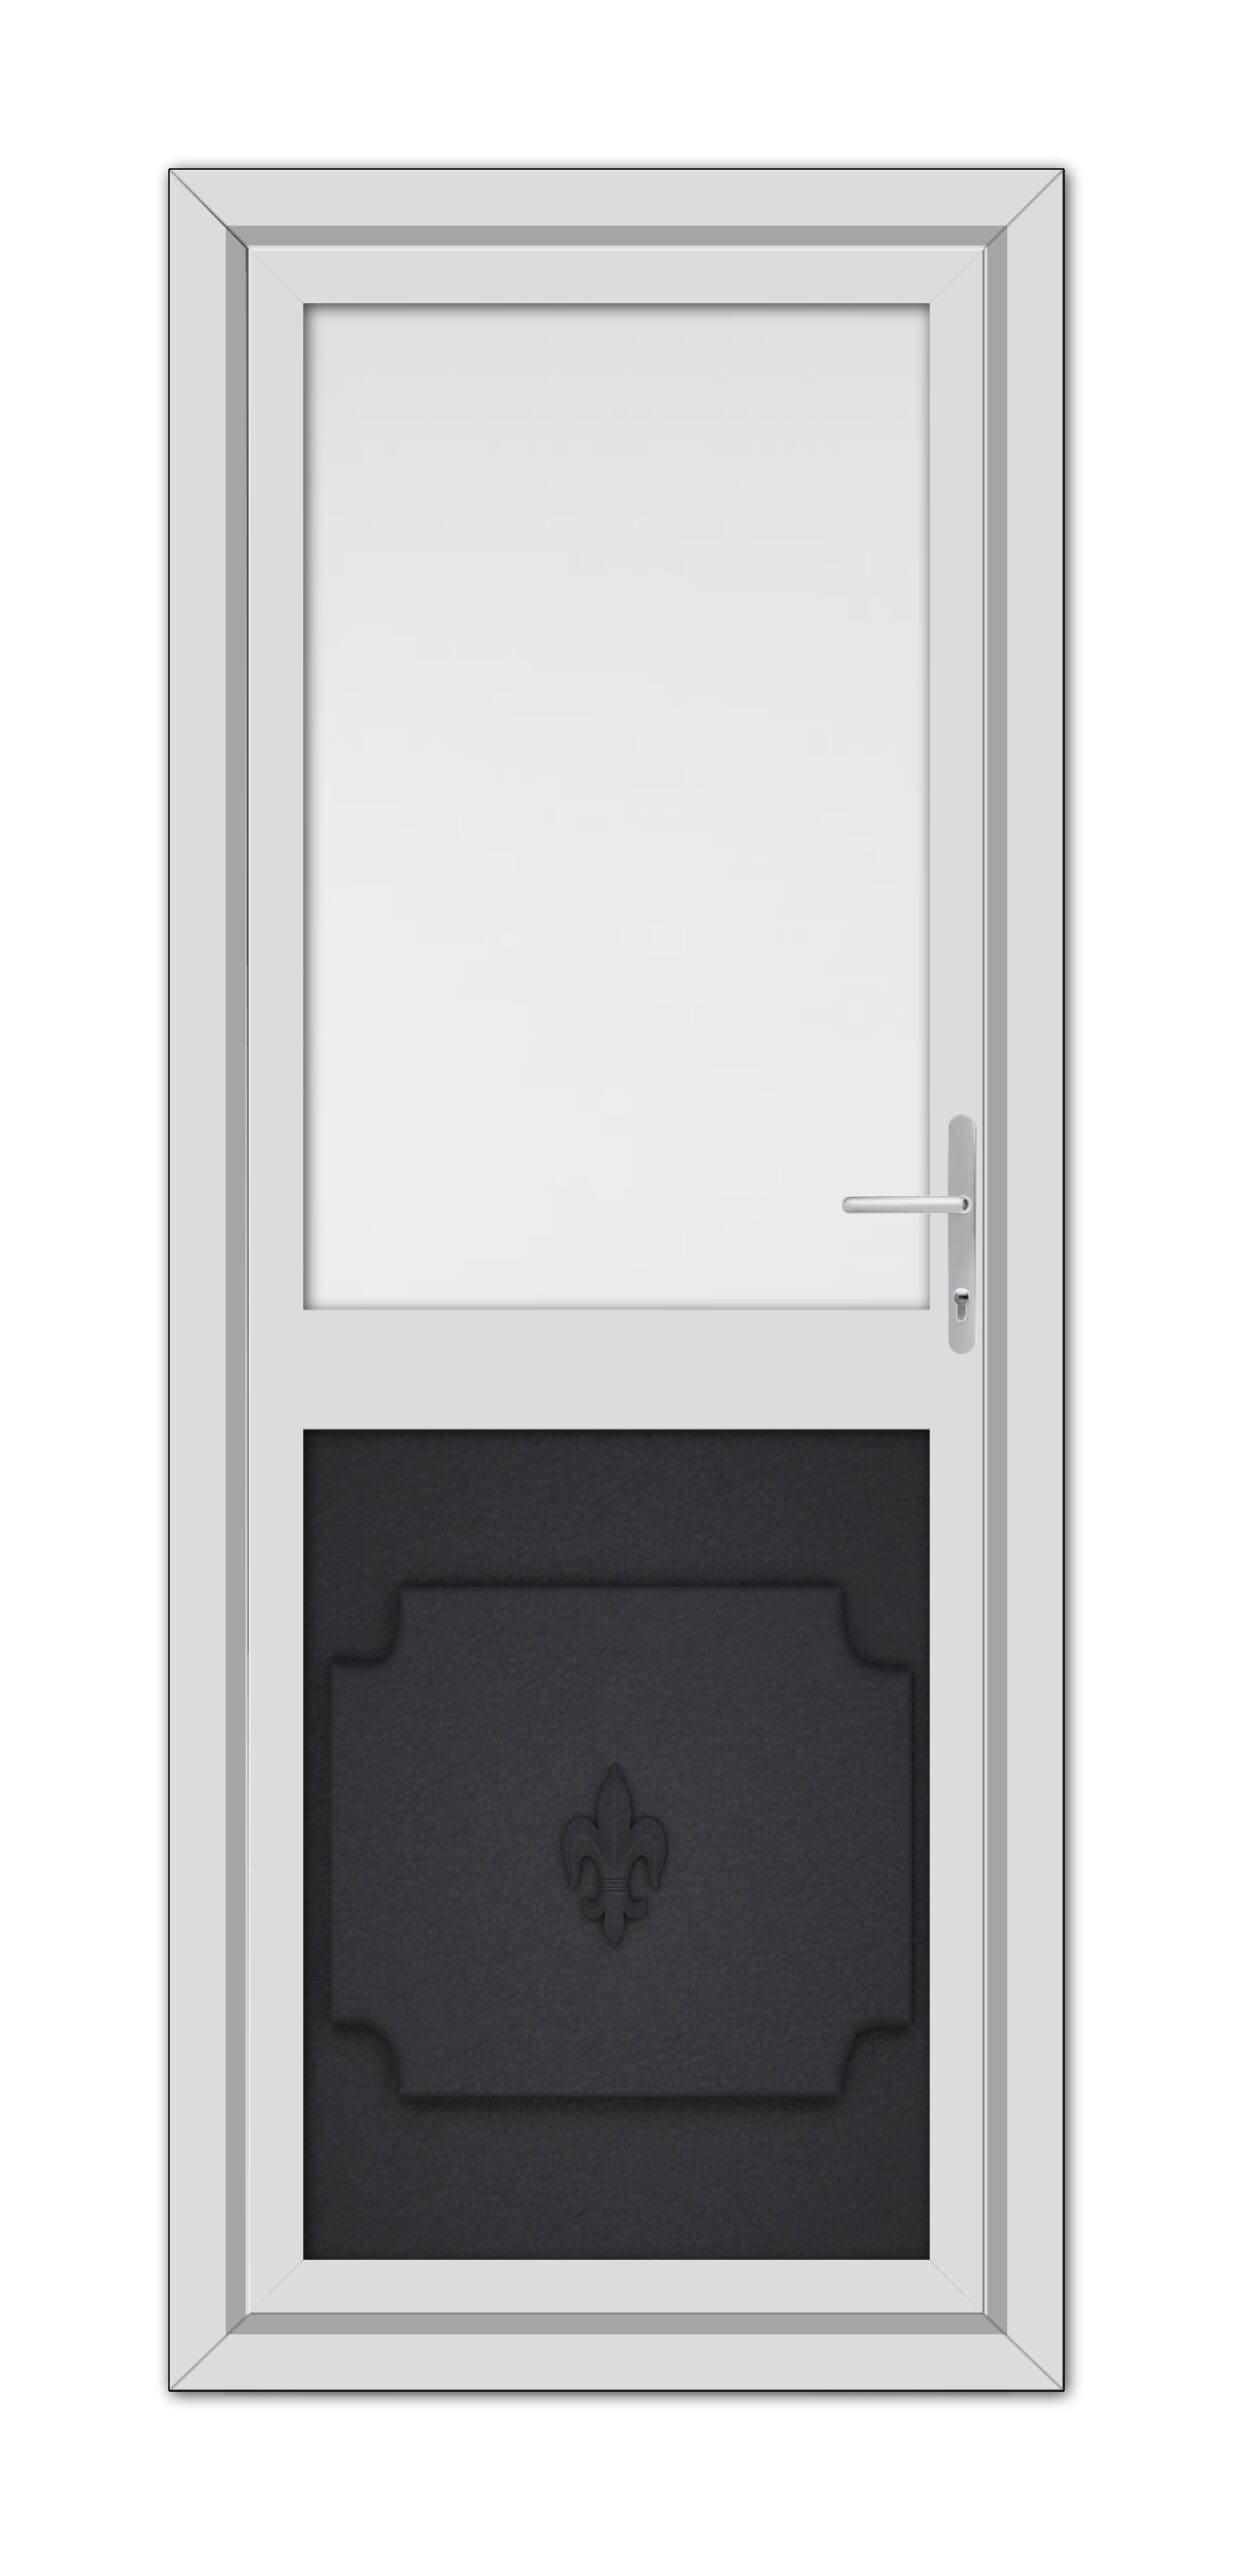 A modern white door with a silver handle, featuring a large glass pane on top and a decorative Black Brown Abbey Half uPVC Back Door with a fleur-de-lis design on the bottom.